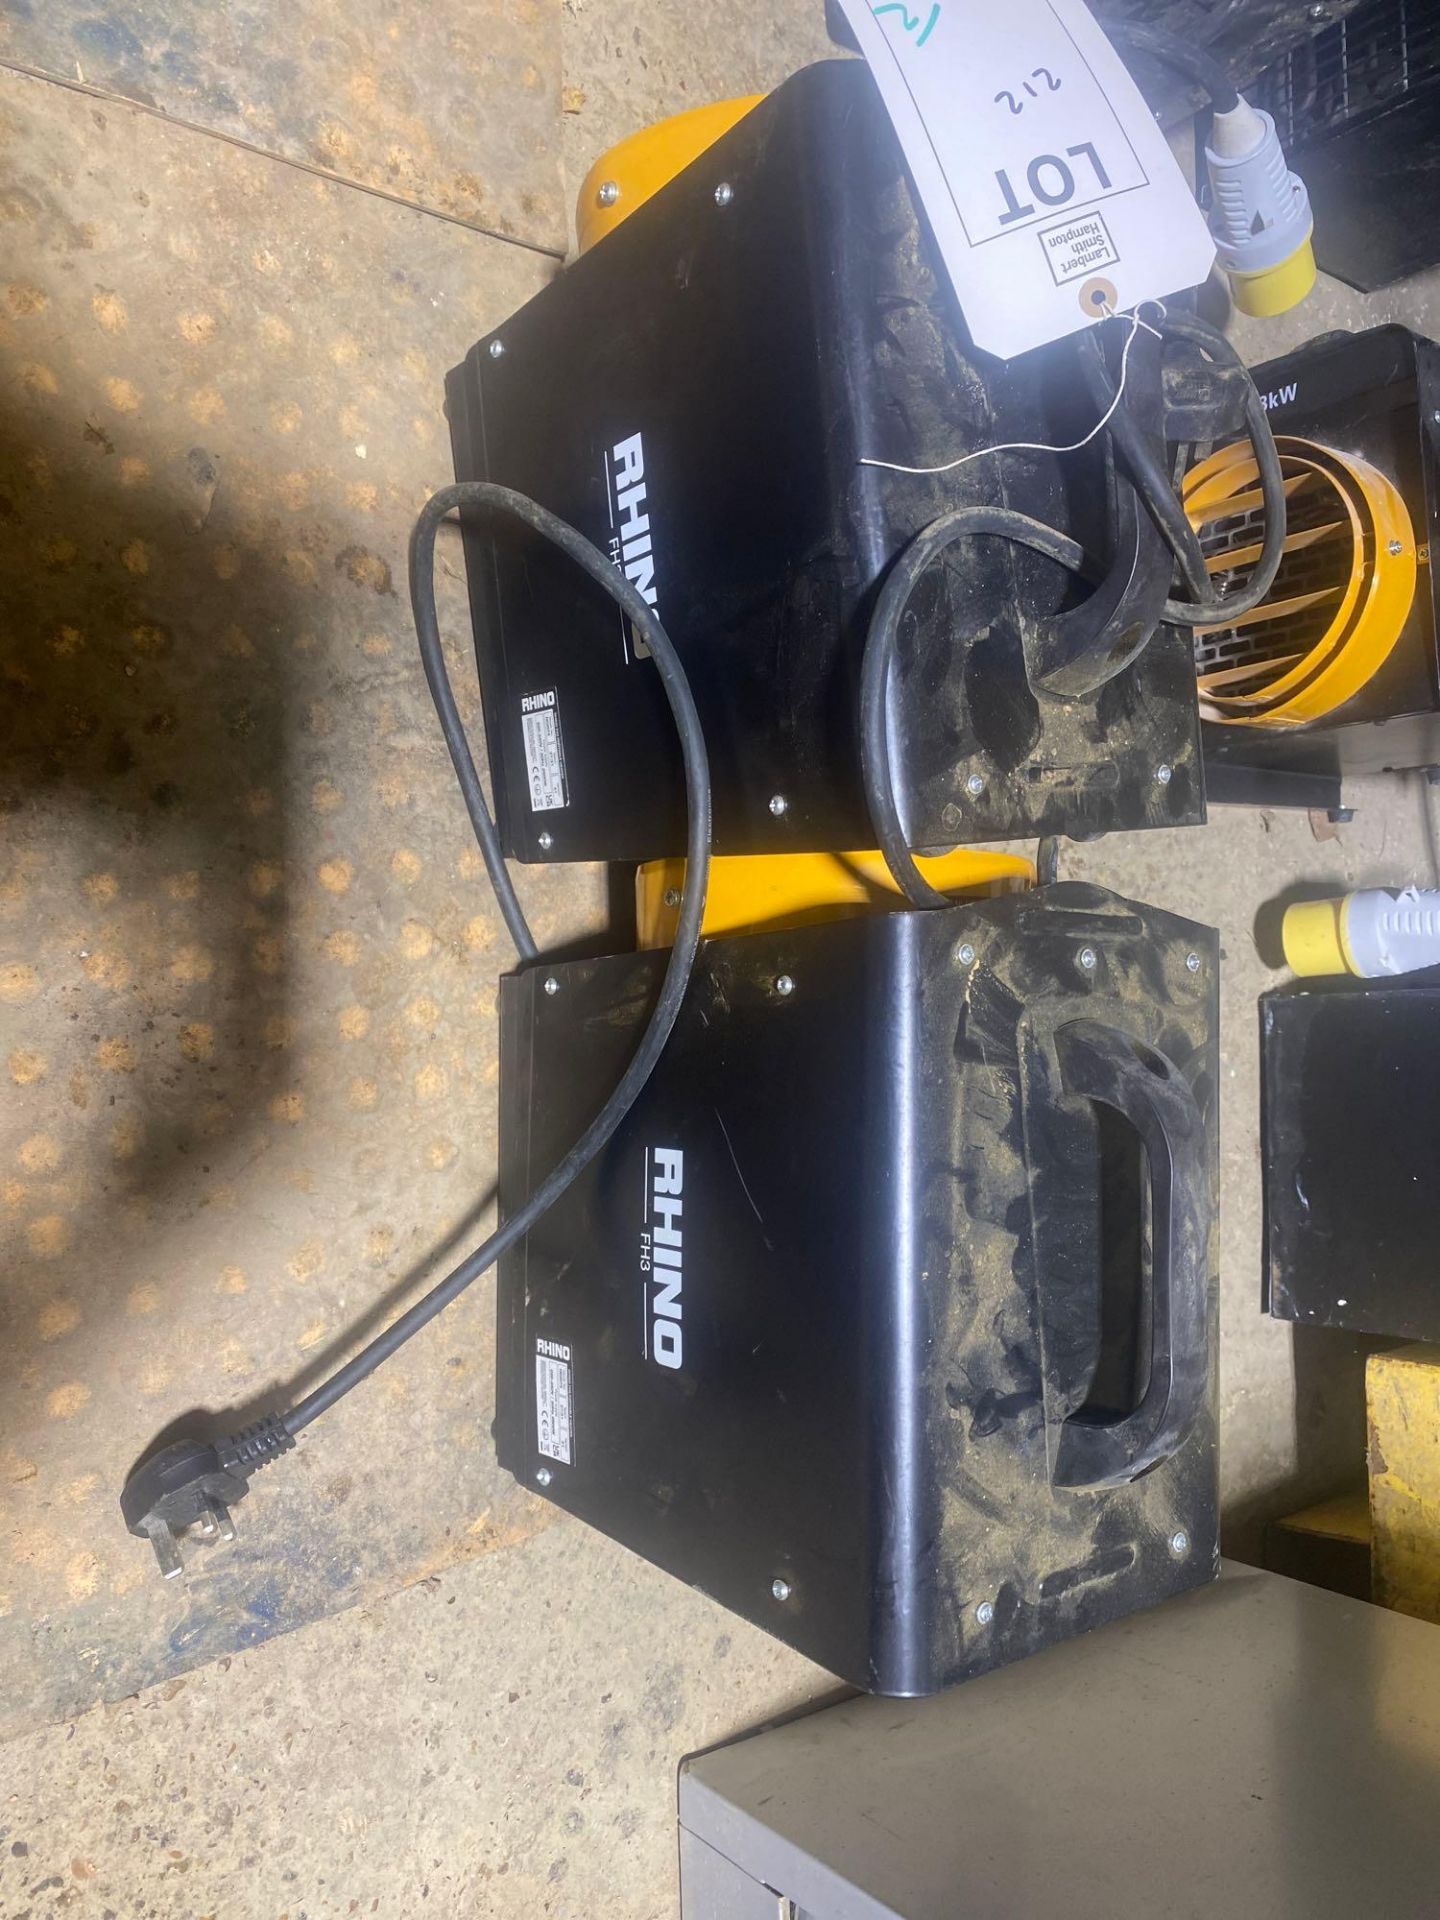 2x Rhino FH3 240v space heater - Image 2 of 2